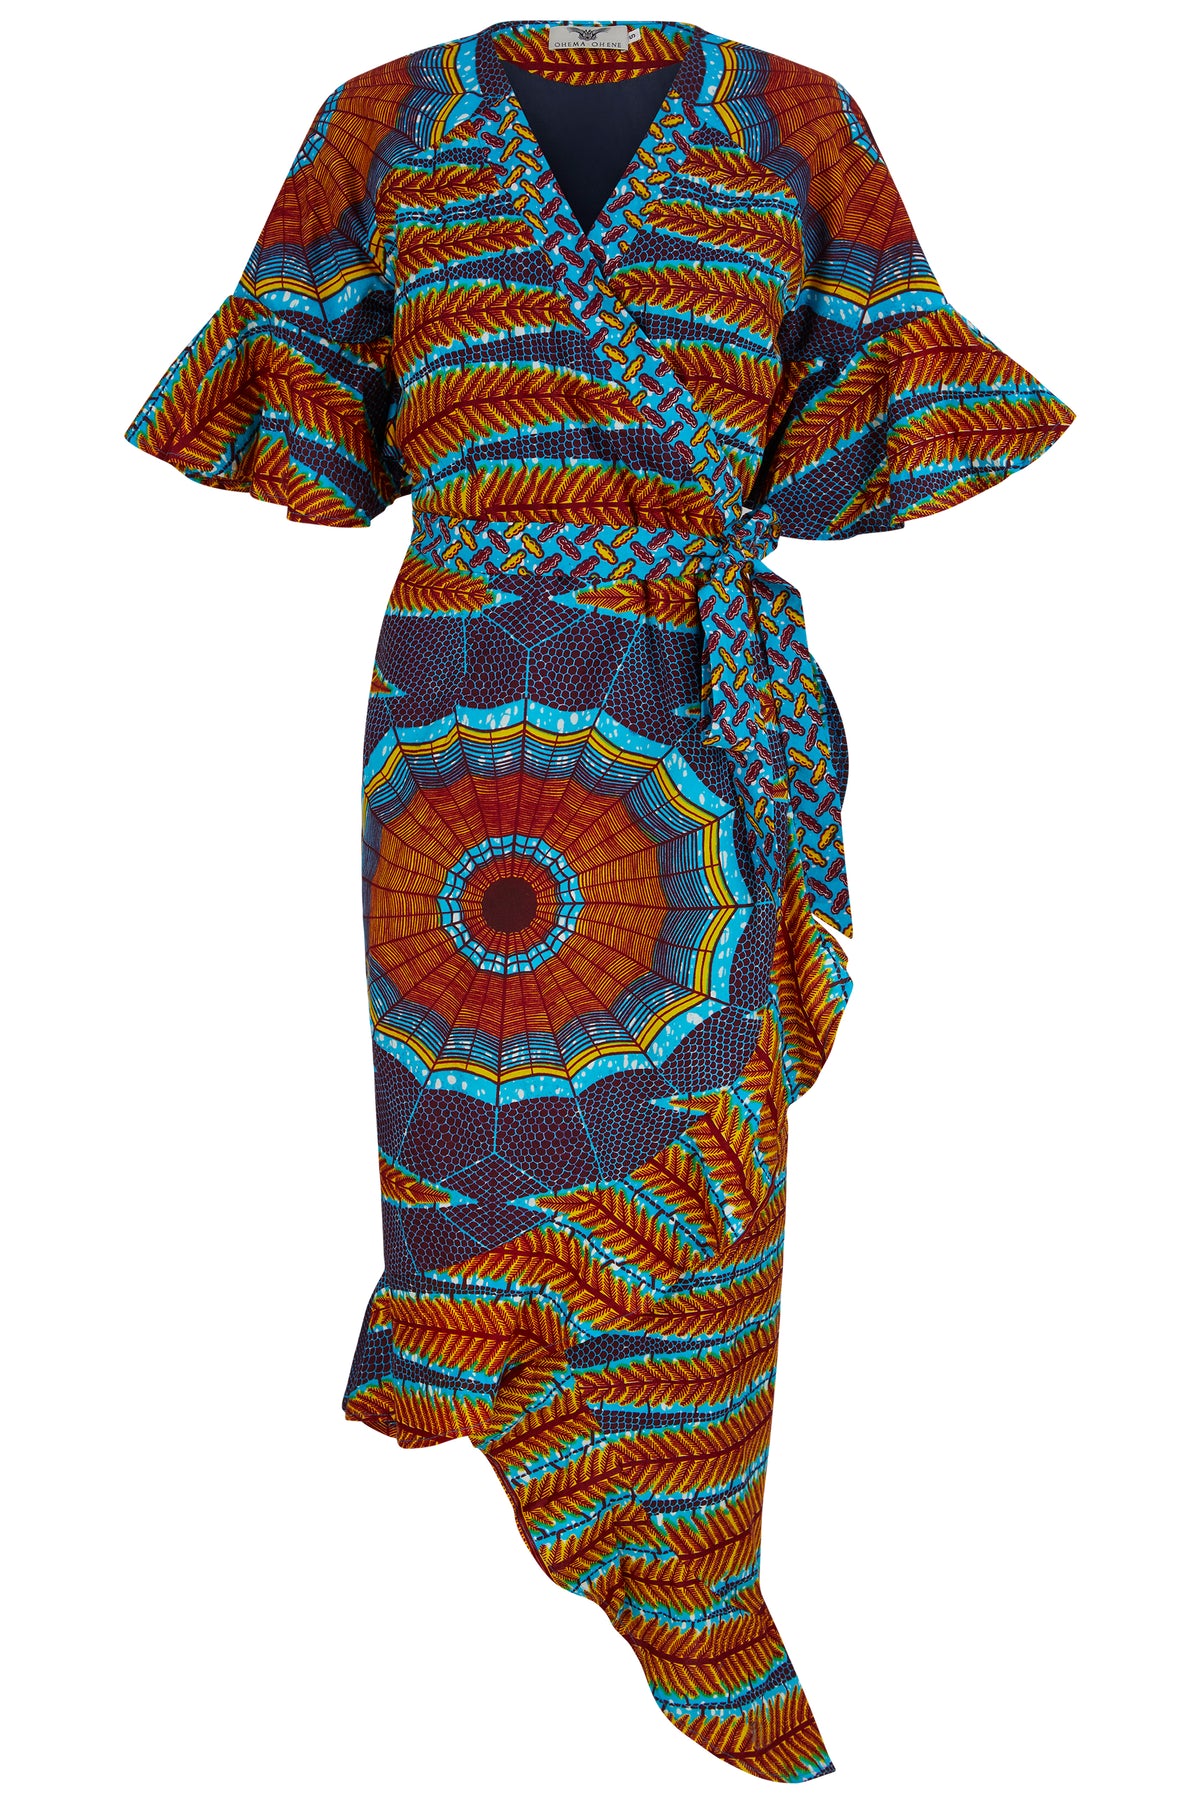 Ameila Midaxi Wrap front dress - OHEMA OHENE AFRICAN INSPIRED FASHION